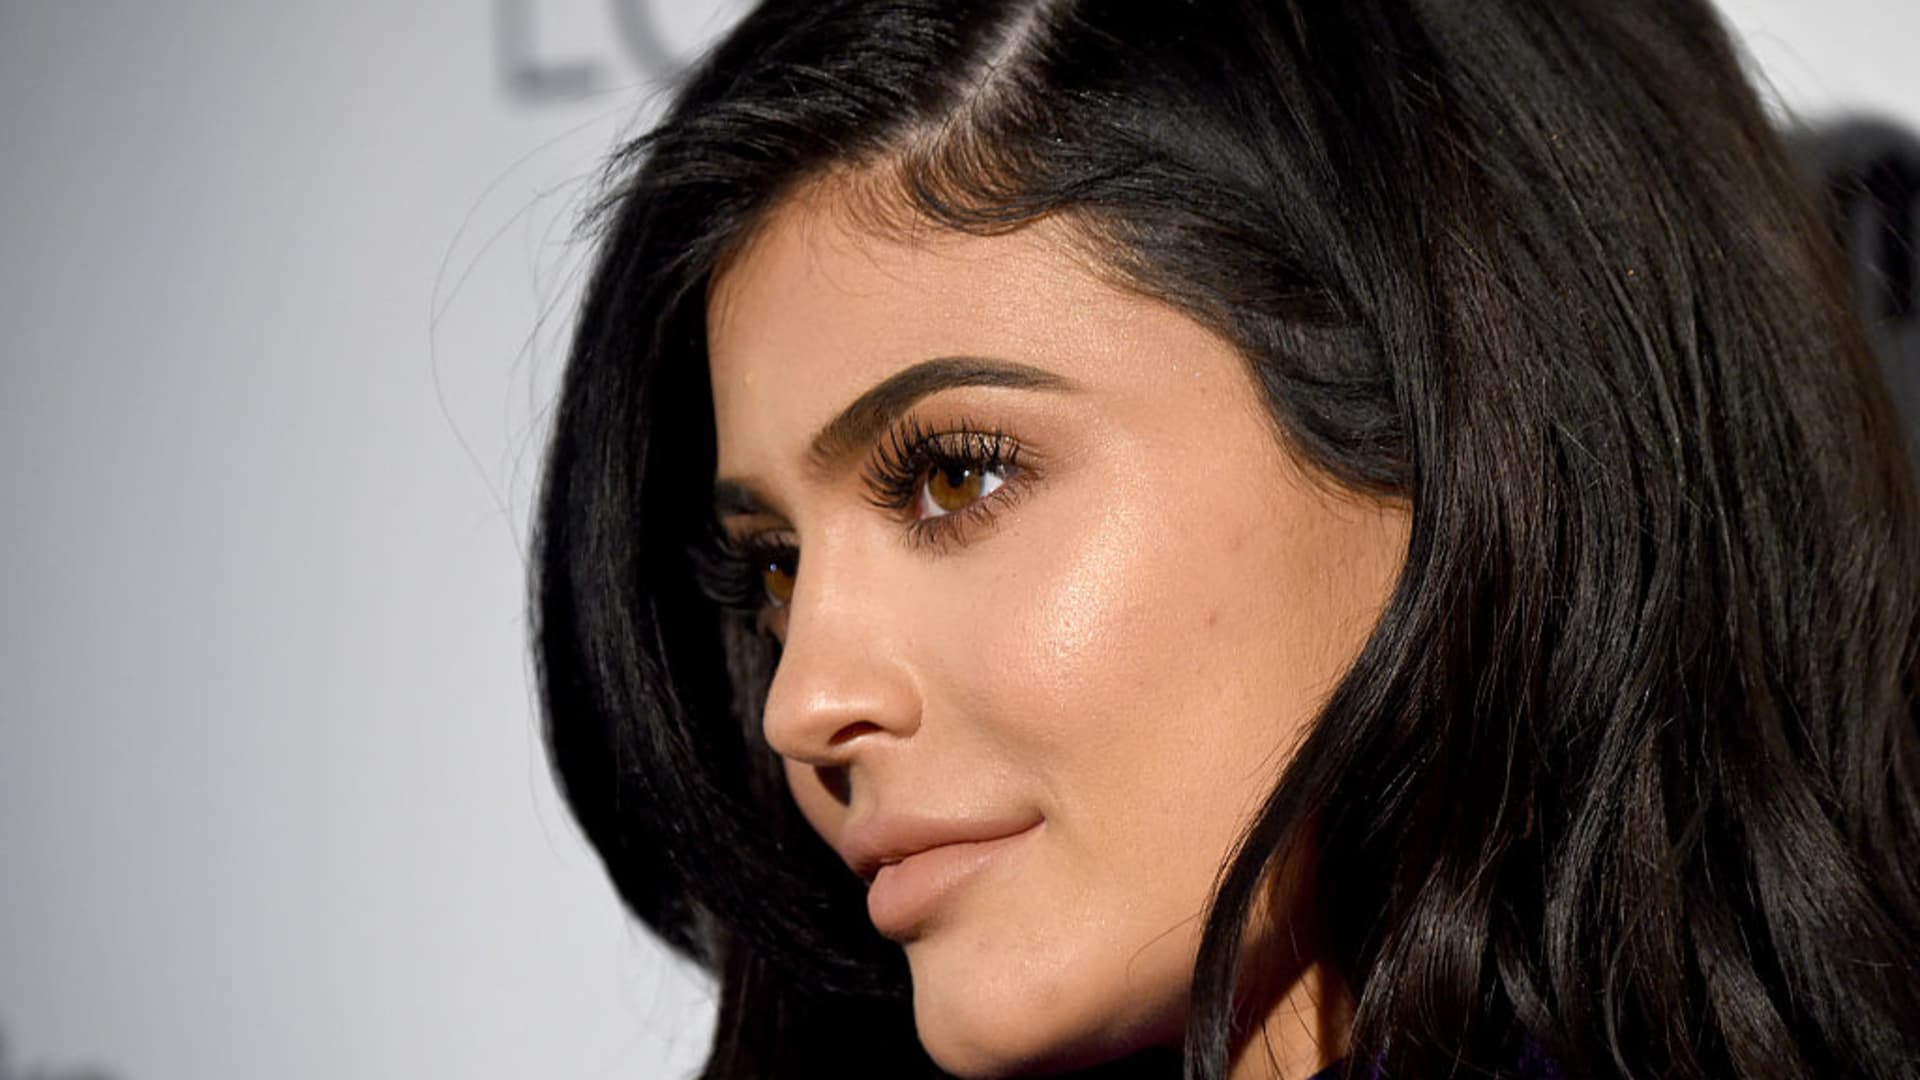 Kylie Jenner  Biography, Age, Siblings, Cosmetics, & Facts